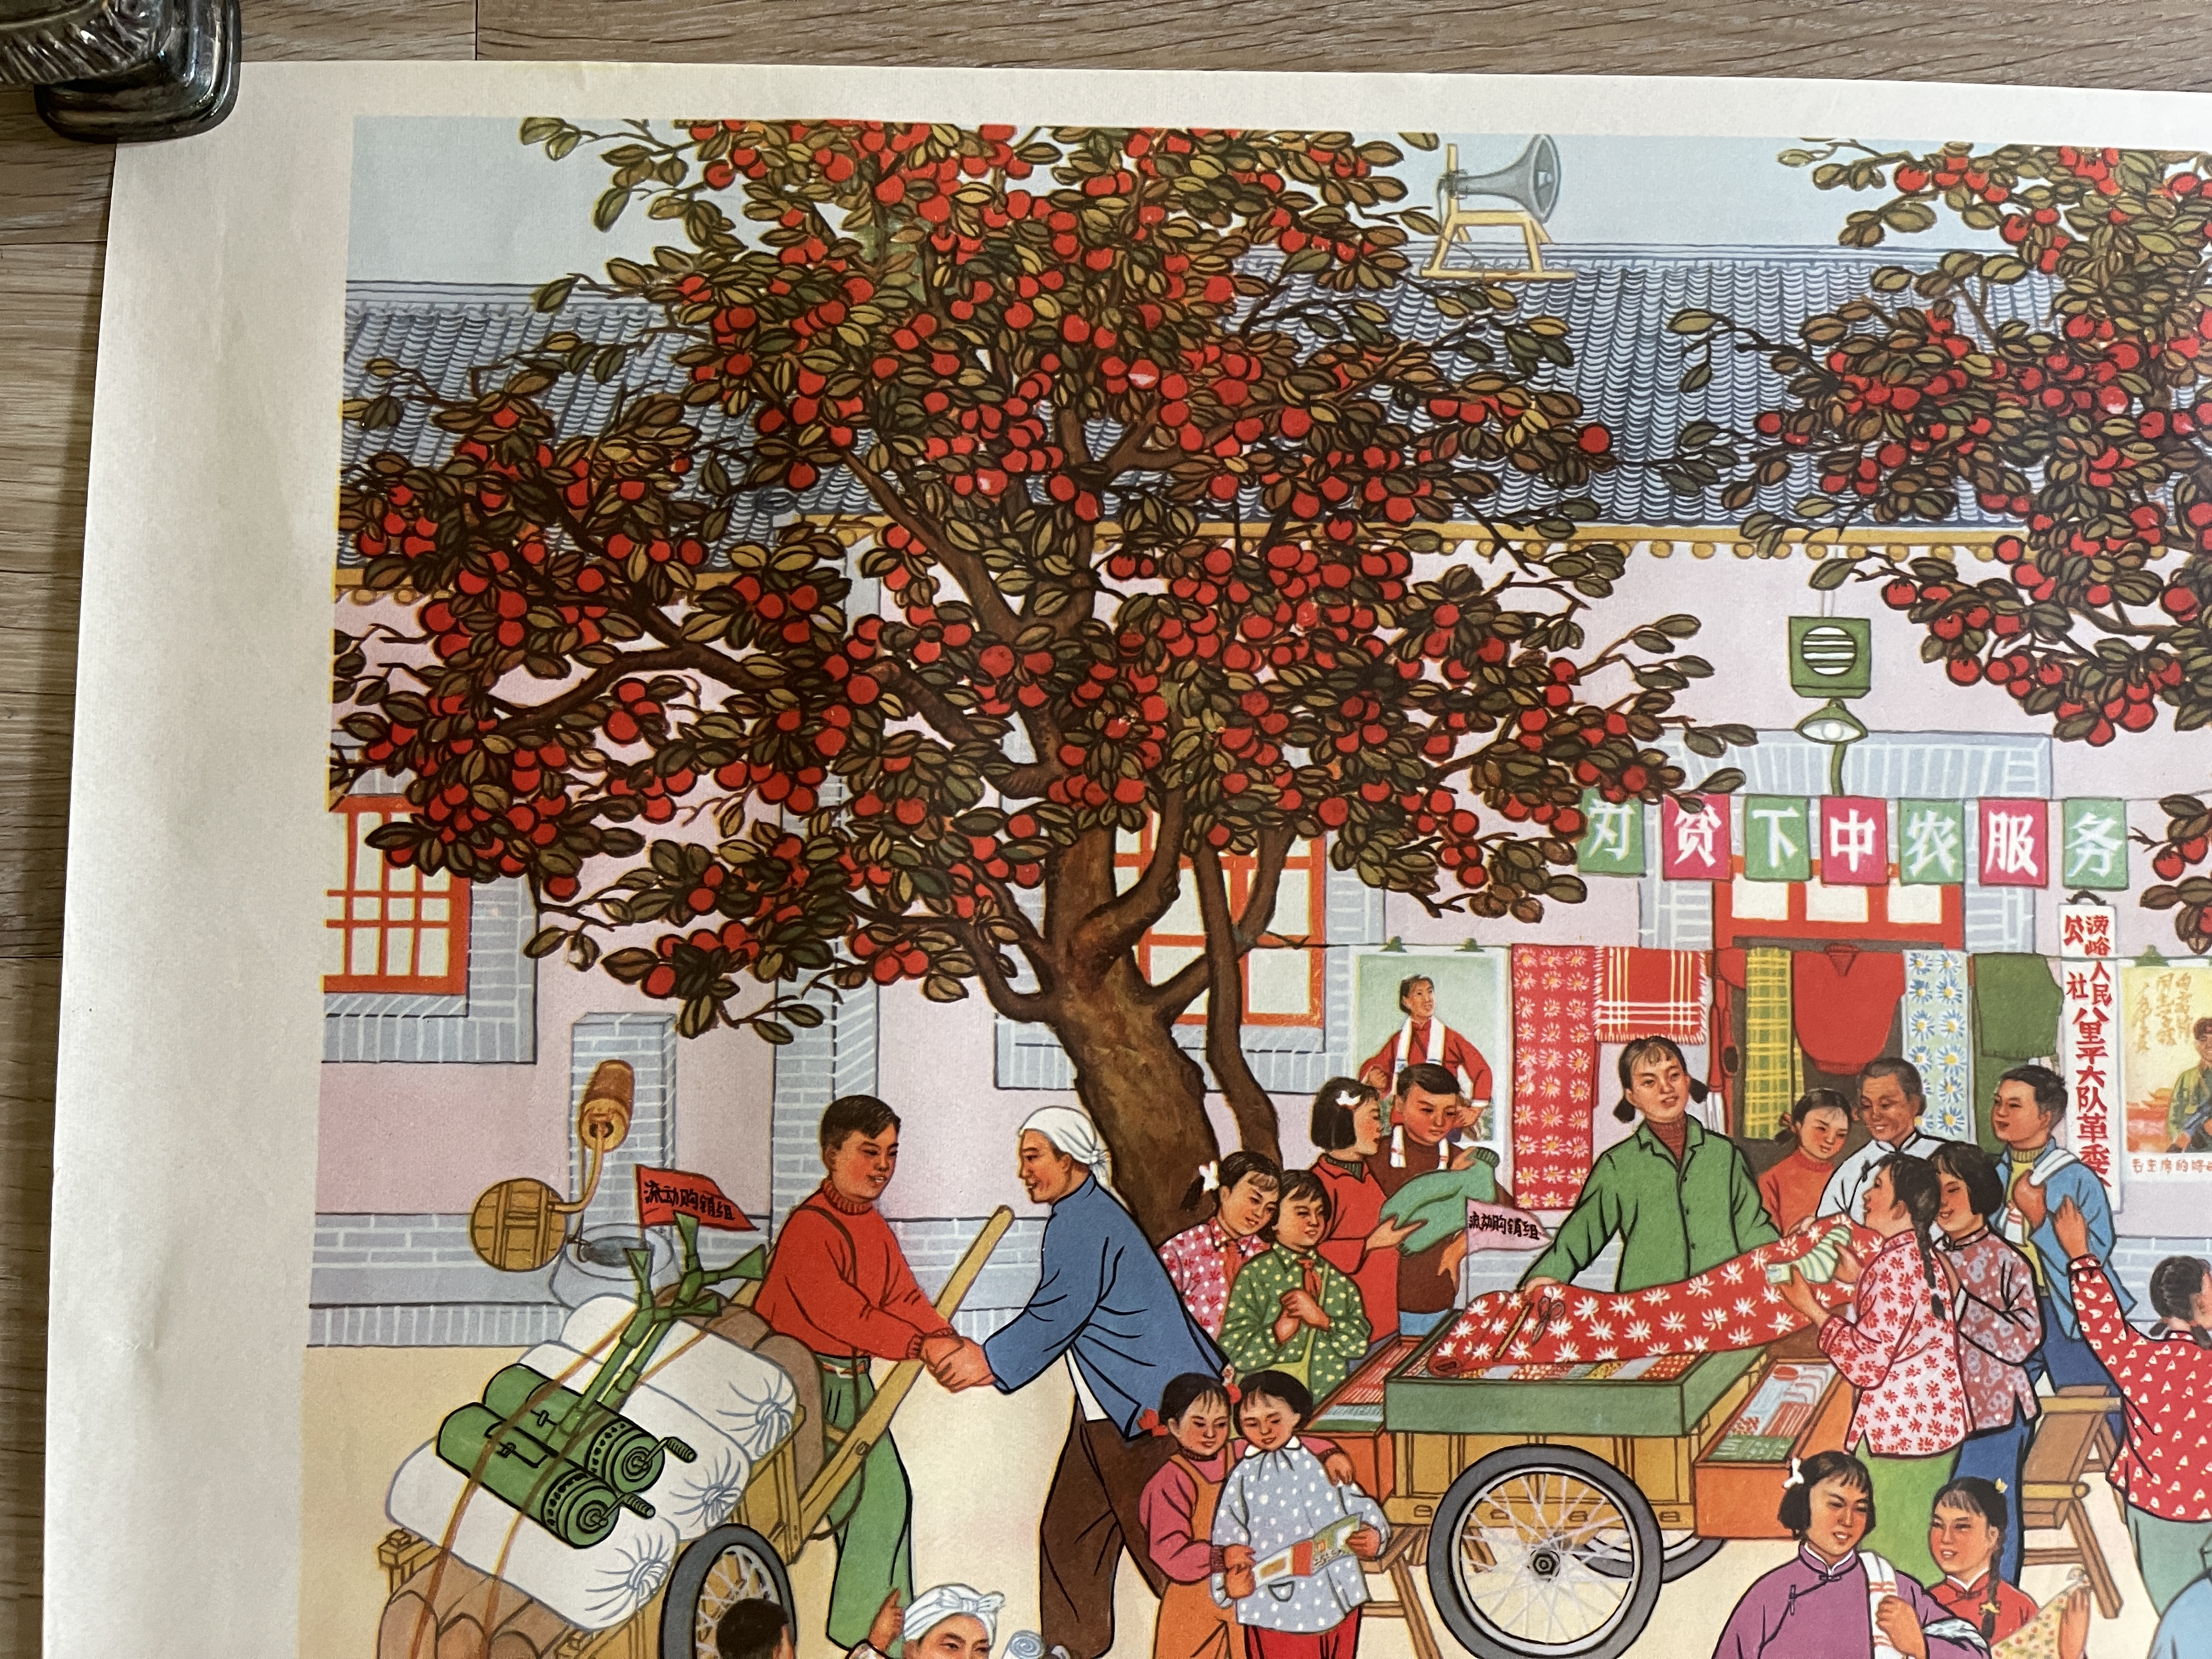 New Market Style - Original Vintage Chinese Poster - Image 2 of 7